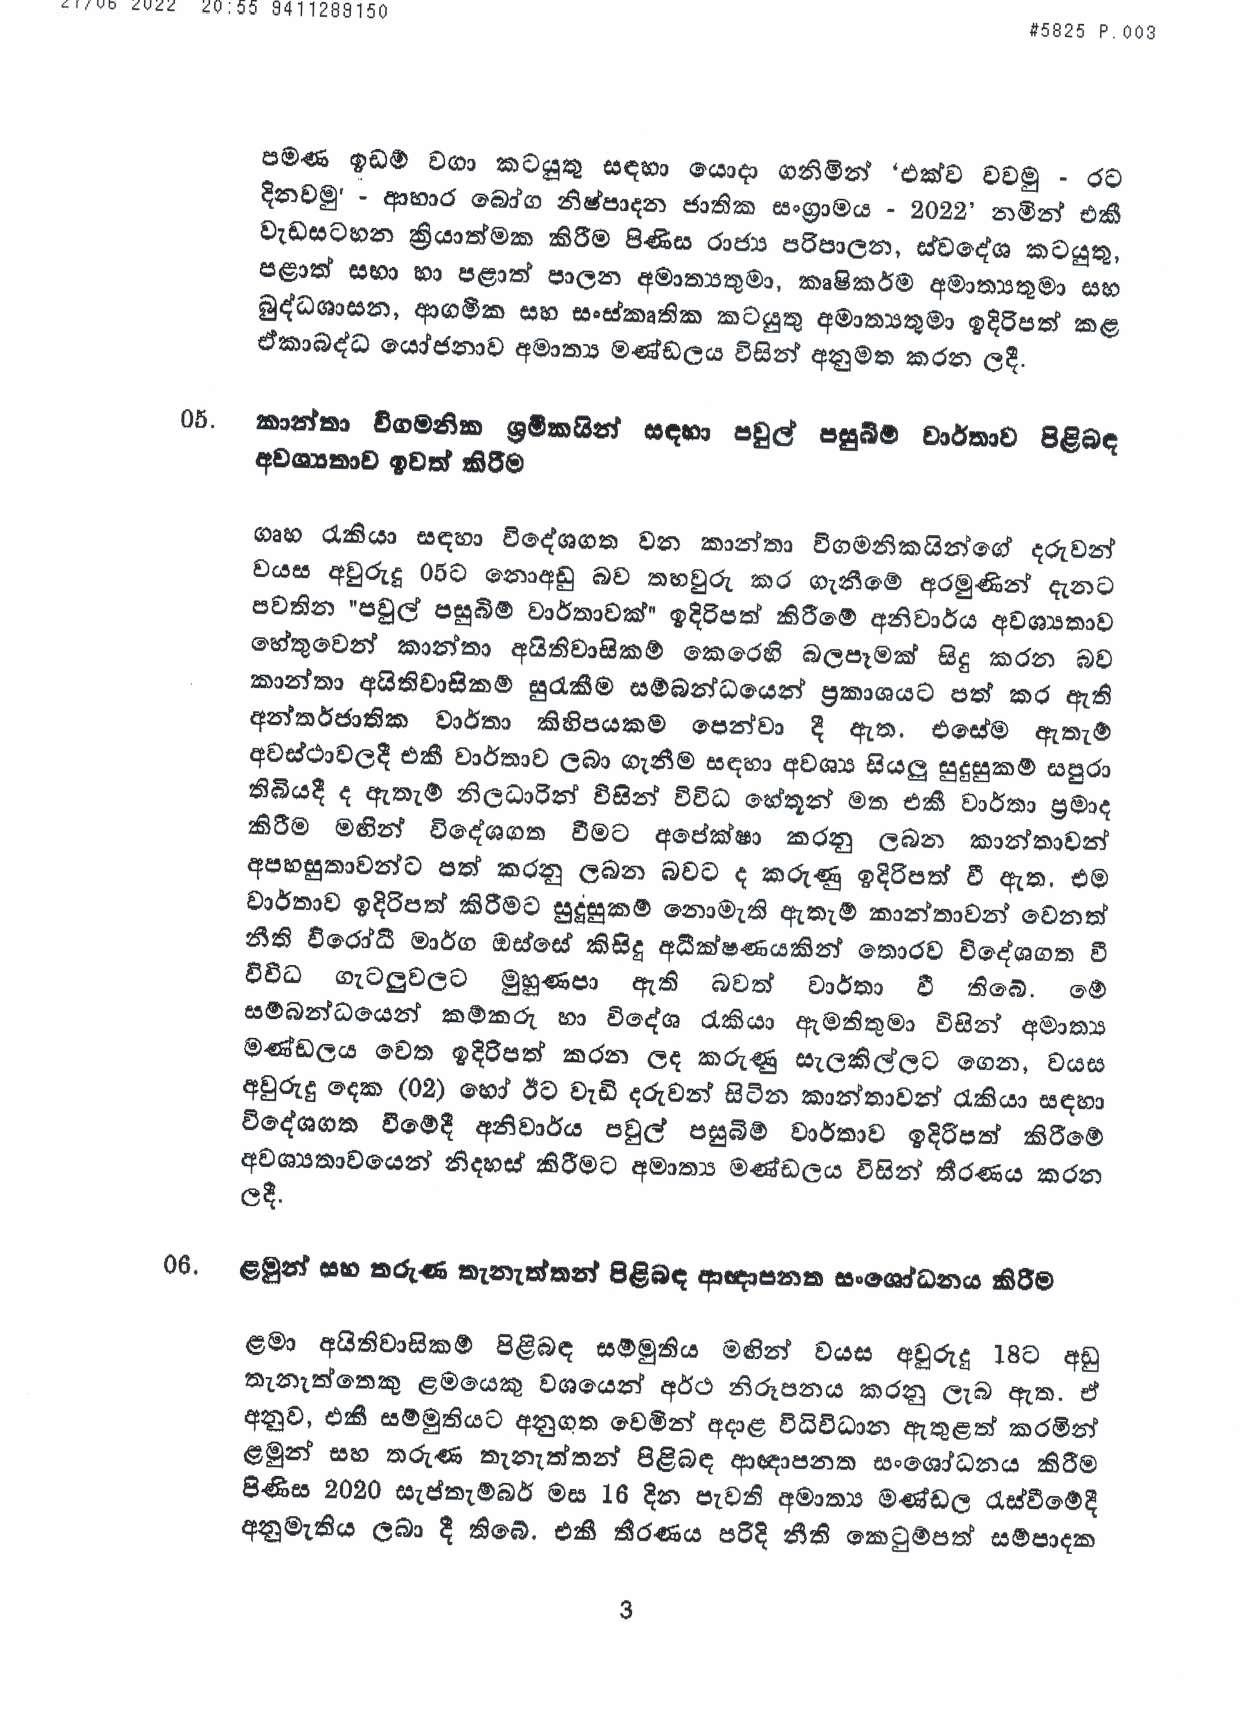 Cabinet Decisions on 27.06.2022 S page 003